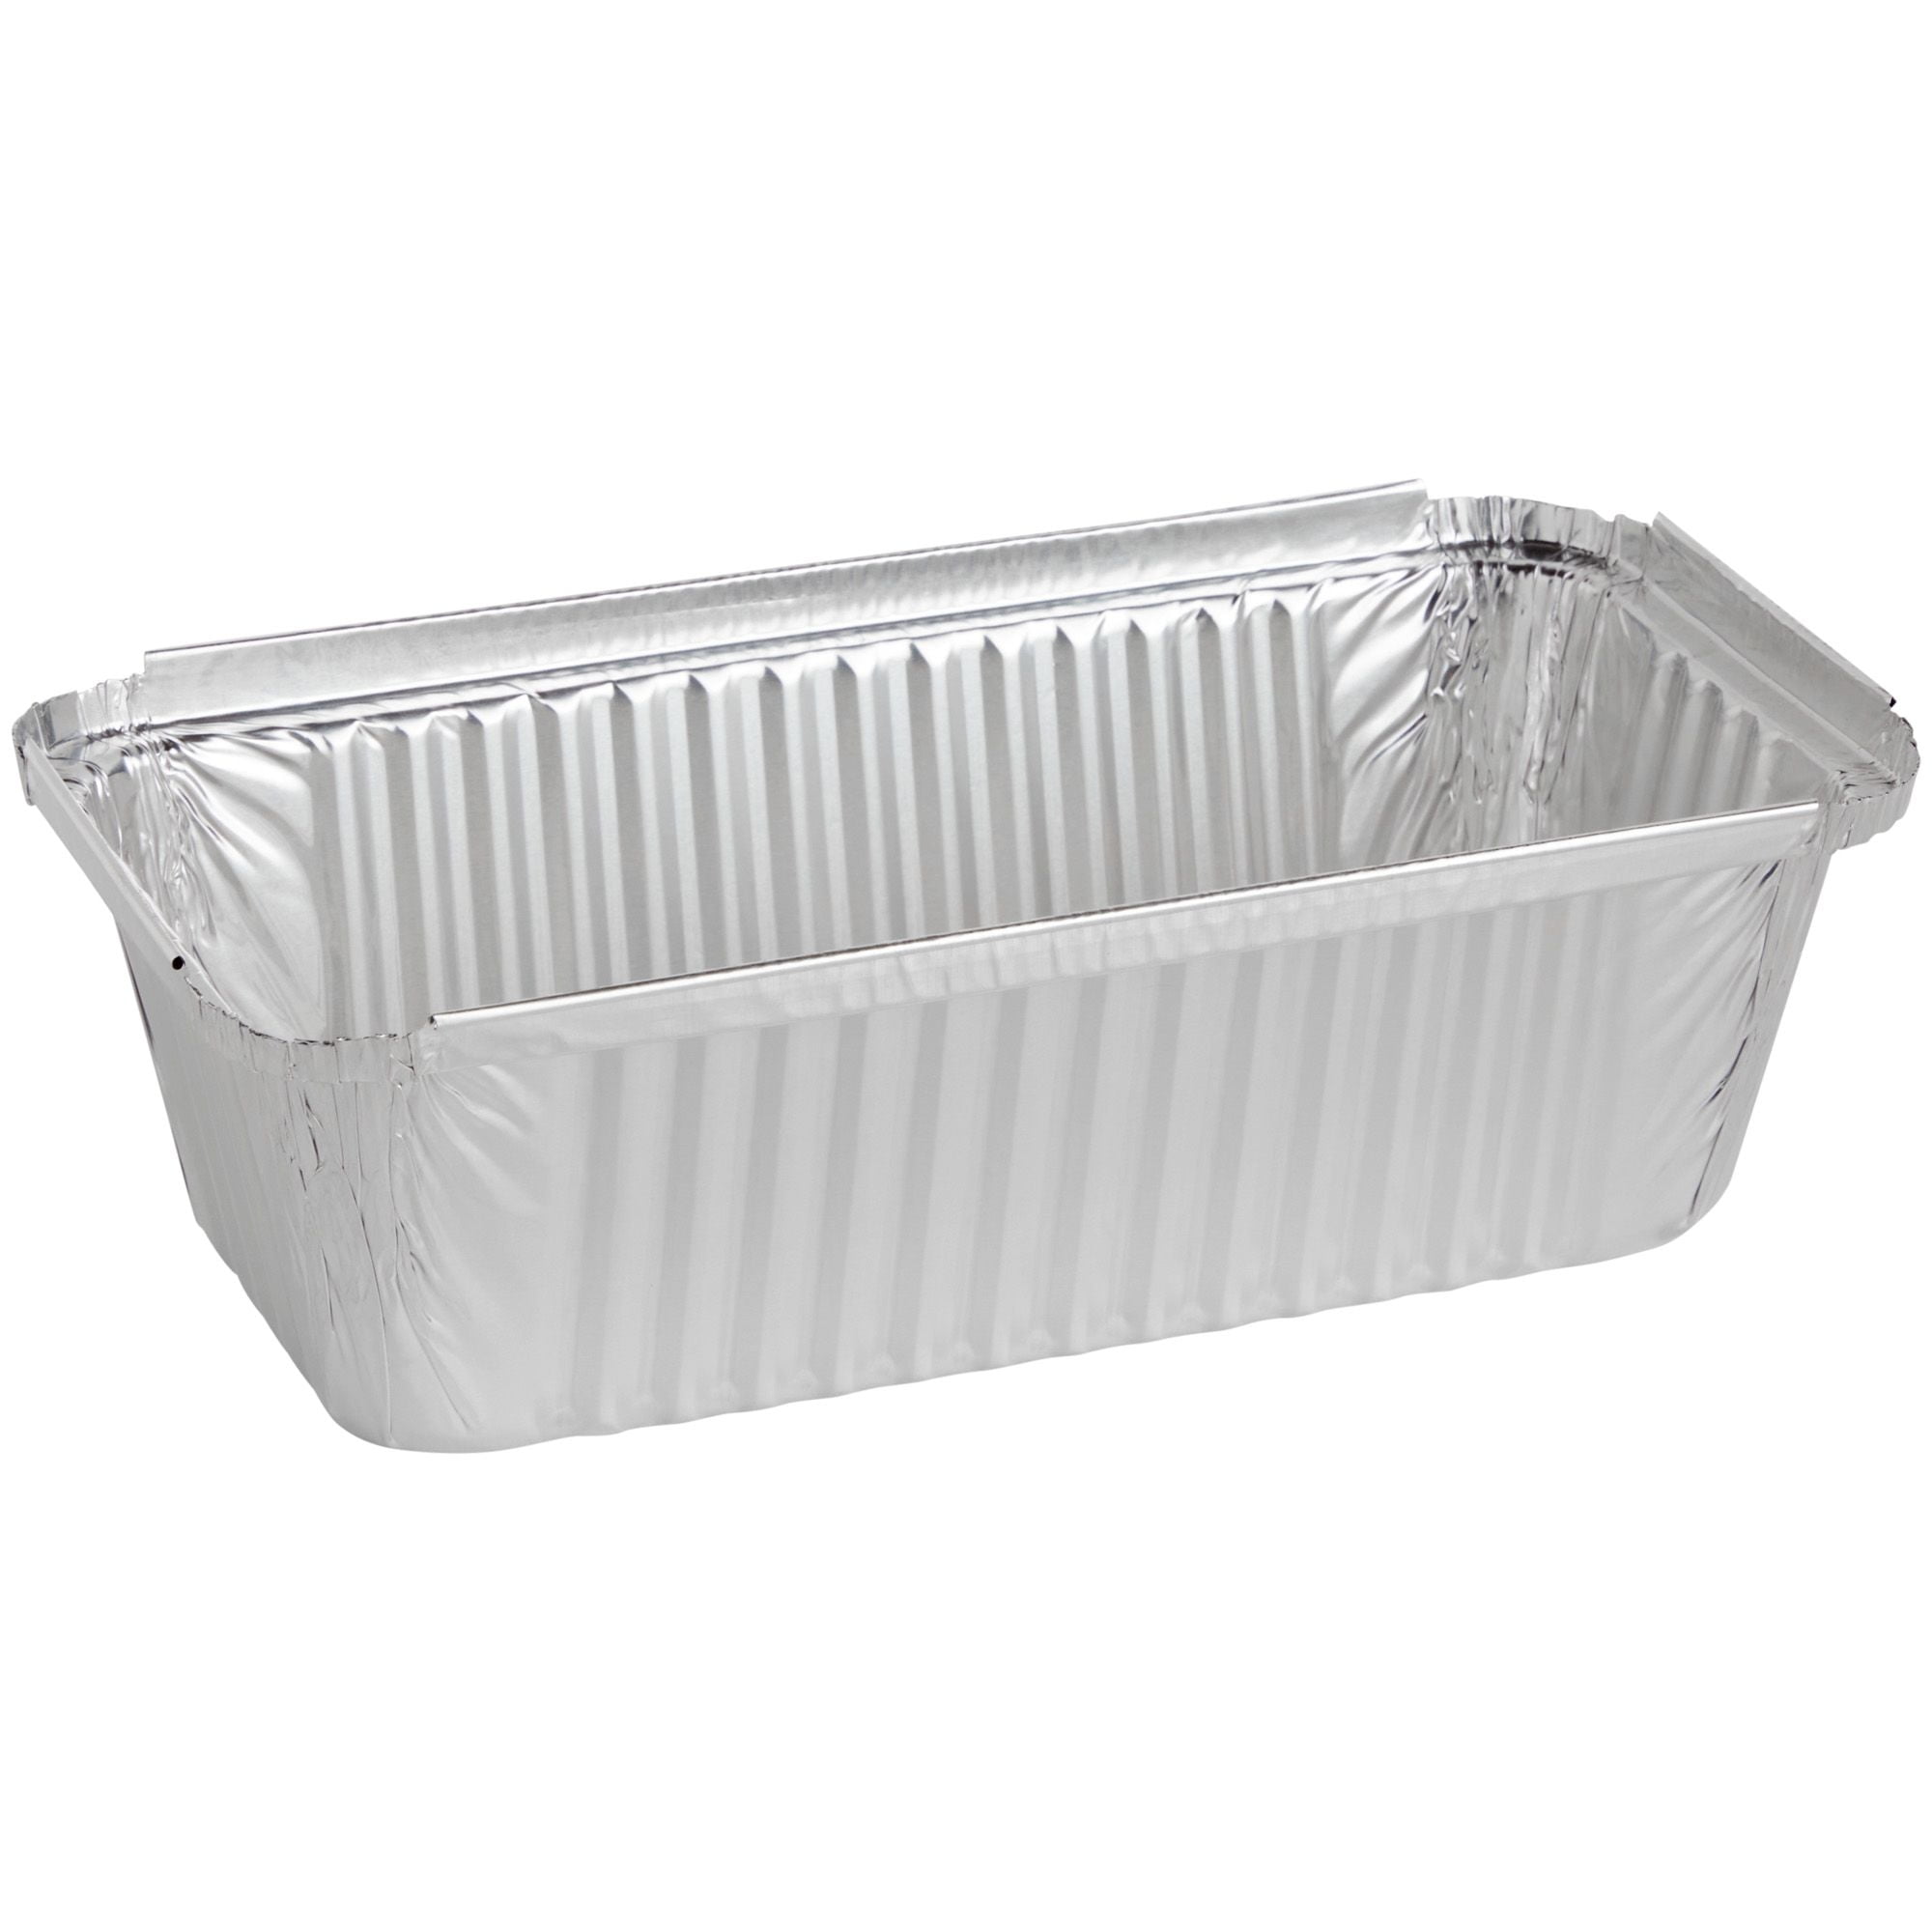 Disposable 2 lb Foil Loaf Pans | 8x4 Bread Pans, 50 Pack, Food Storage  Containers, Take Out Boxes, Perfect for Baking Bread and Street Treats